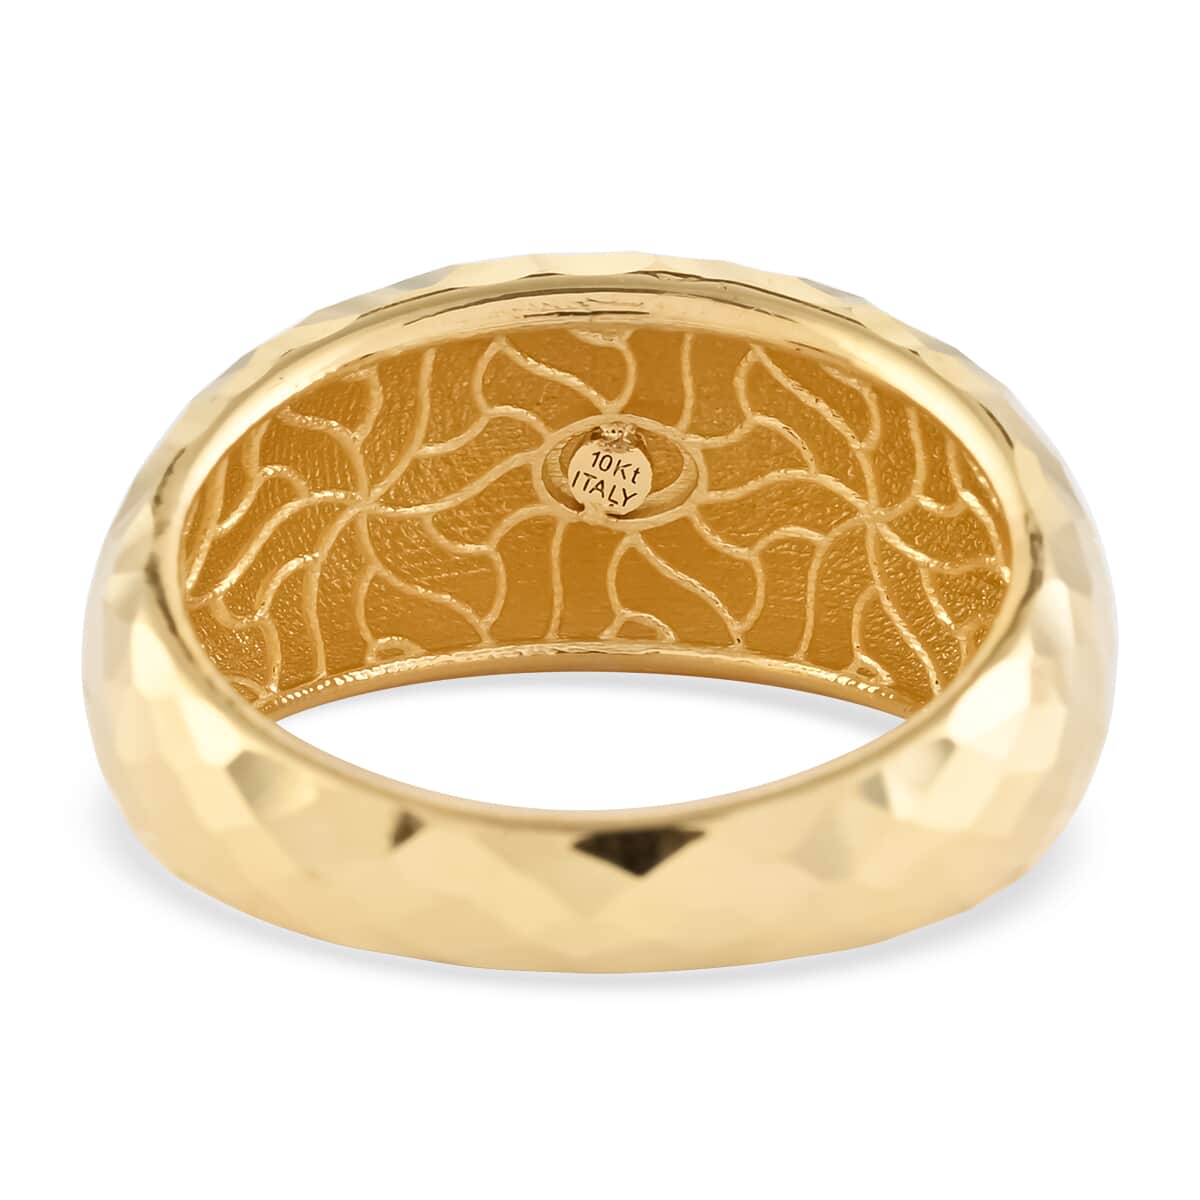 Maestro Gold Collection Italian 10K Yellow Gold Multi Cut Domed Ring (Size 6.0) 2.10 Grams image number 4